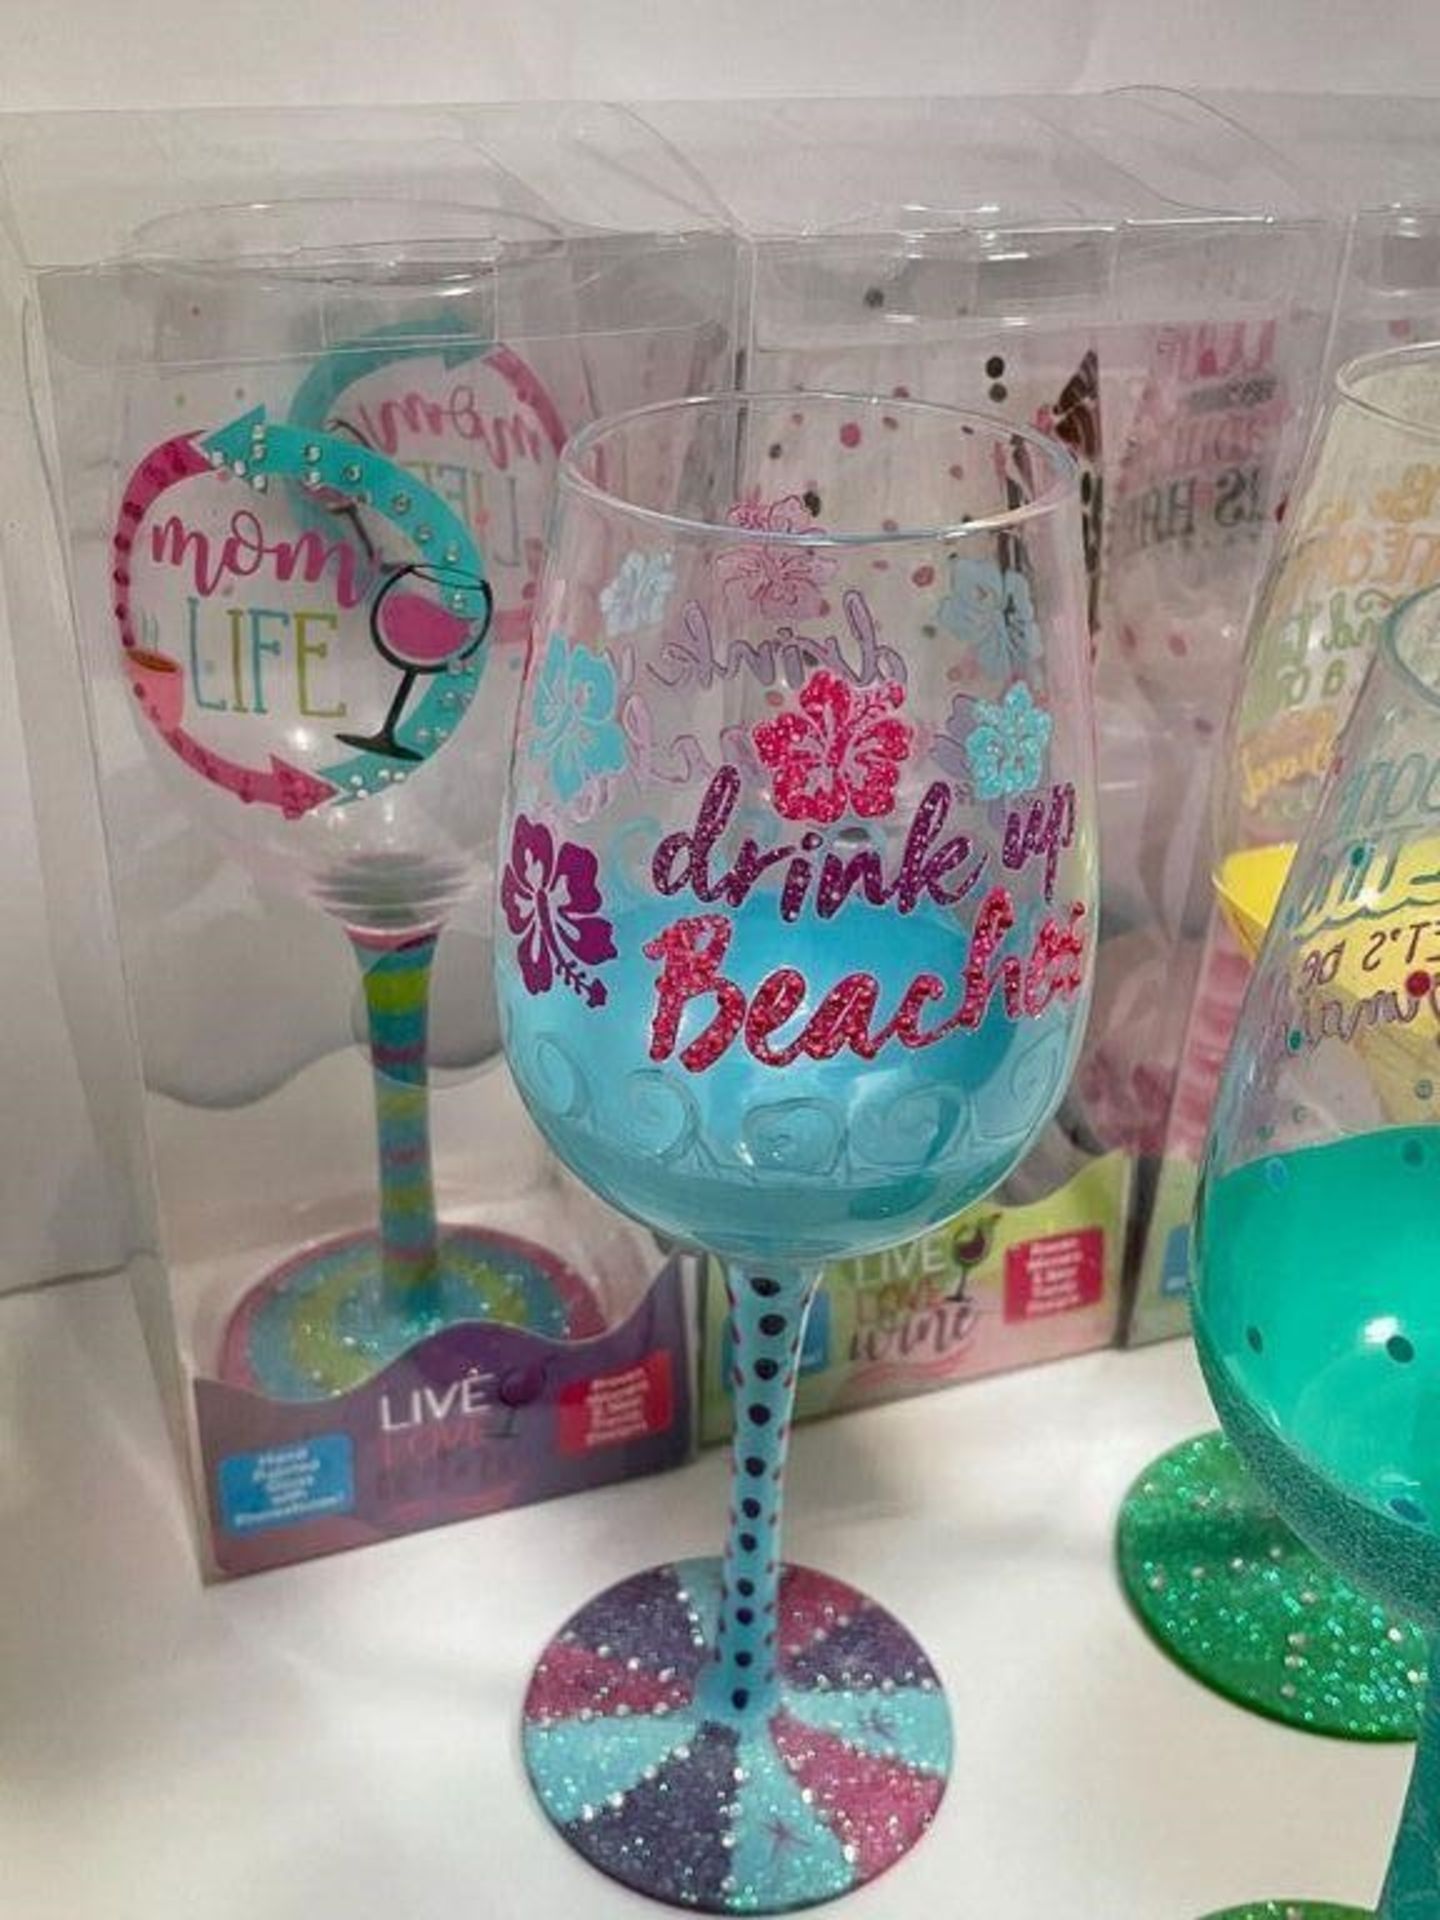 6 X DECORATED WINE GLASSES WITH FUN SAYINGS/PHRASES, VAROUS SAYINGS AND DESIGNS - Image 5 of 5